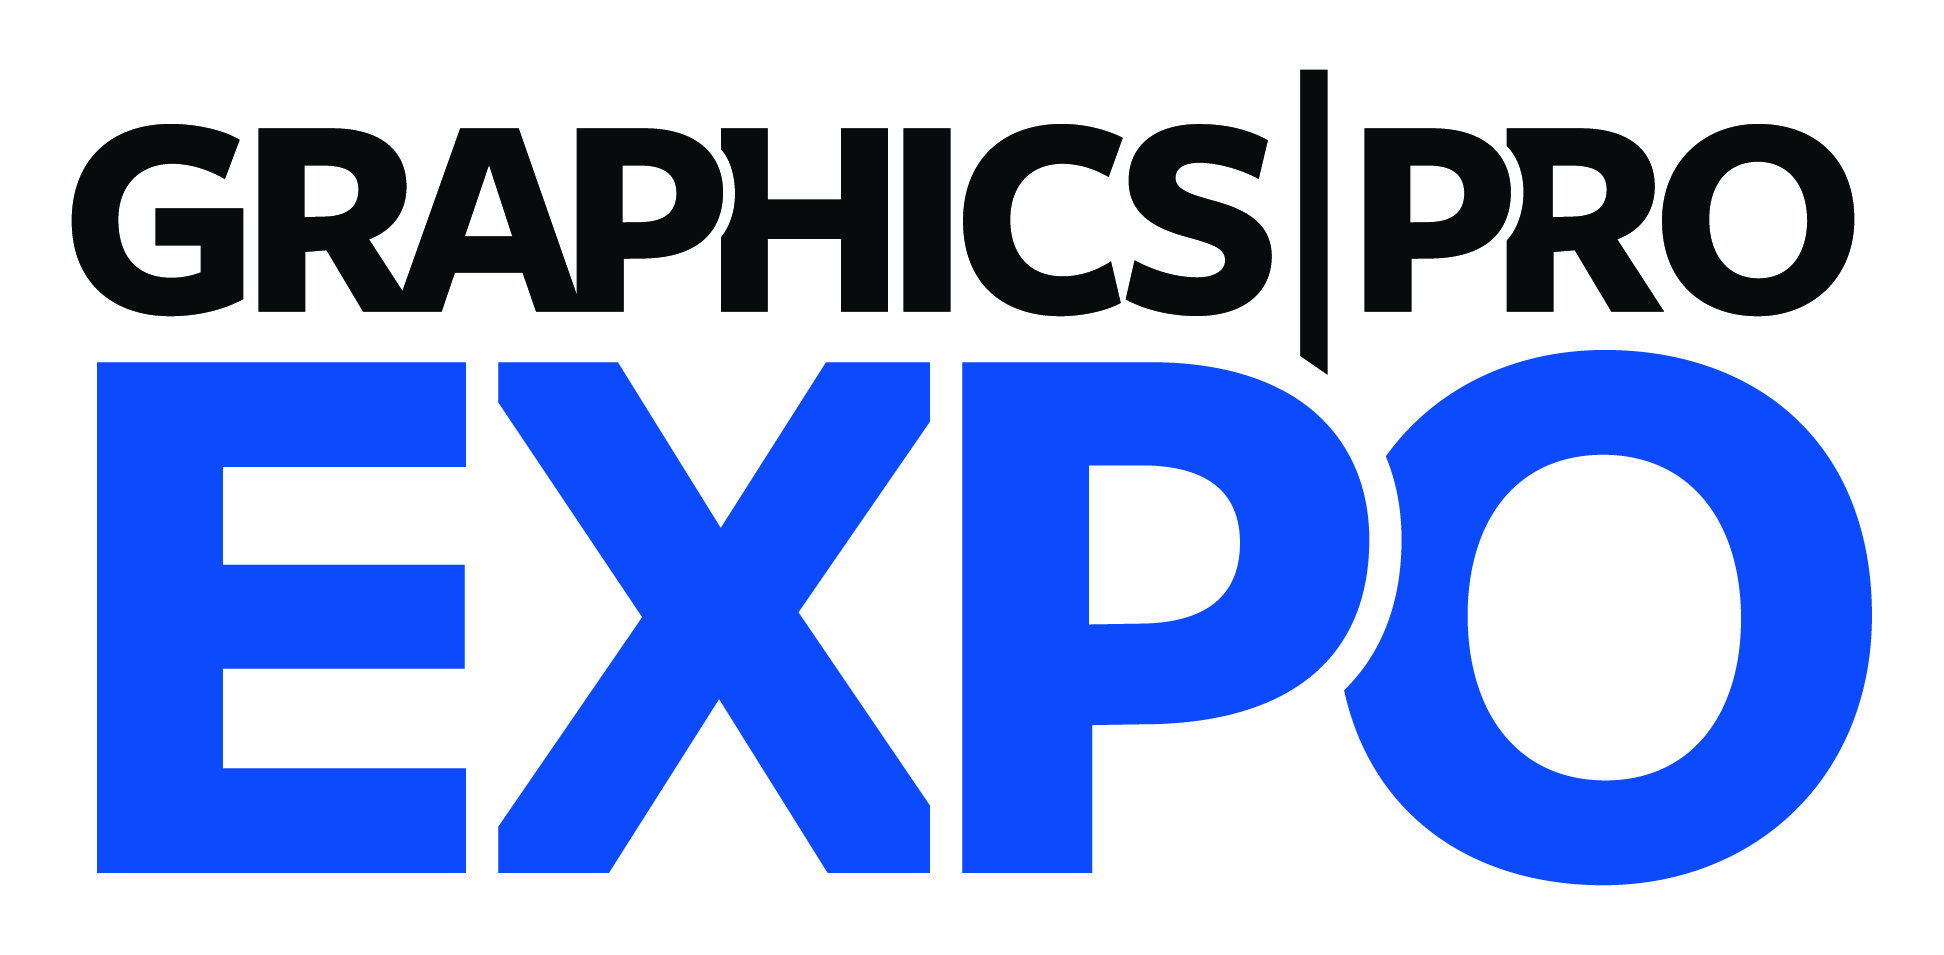 THE NBM SHOW GRAPHICS PRO EXPO in 2021 GRAPHICS PRO